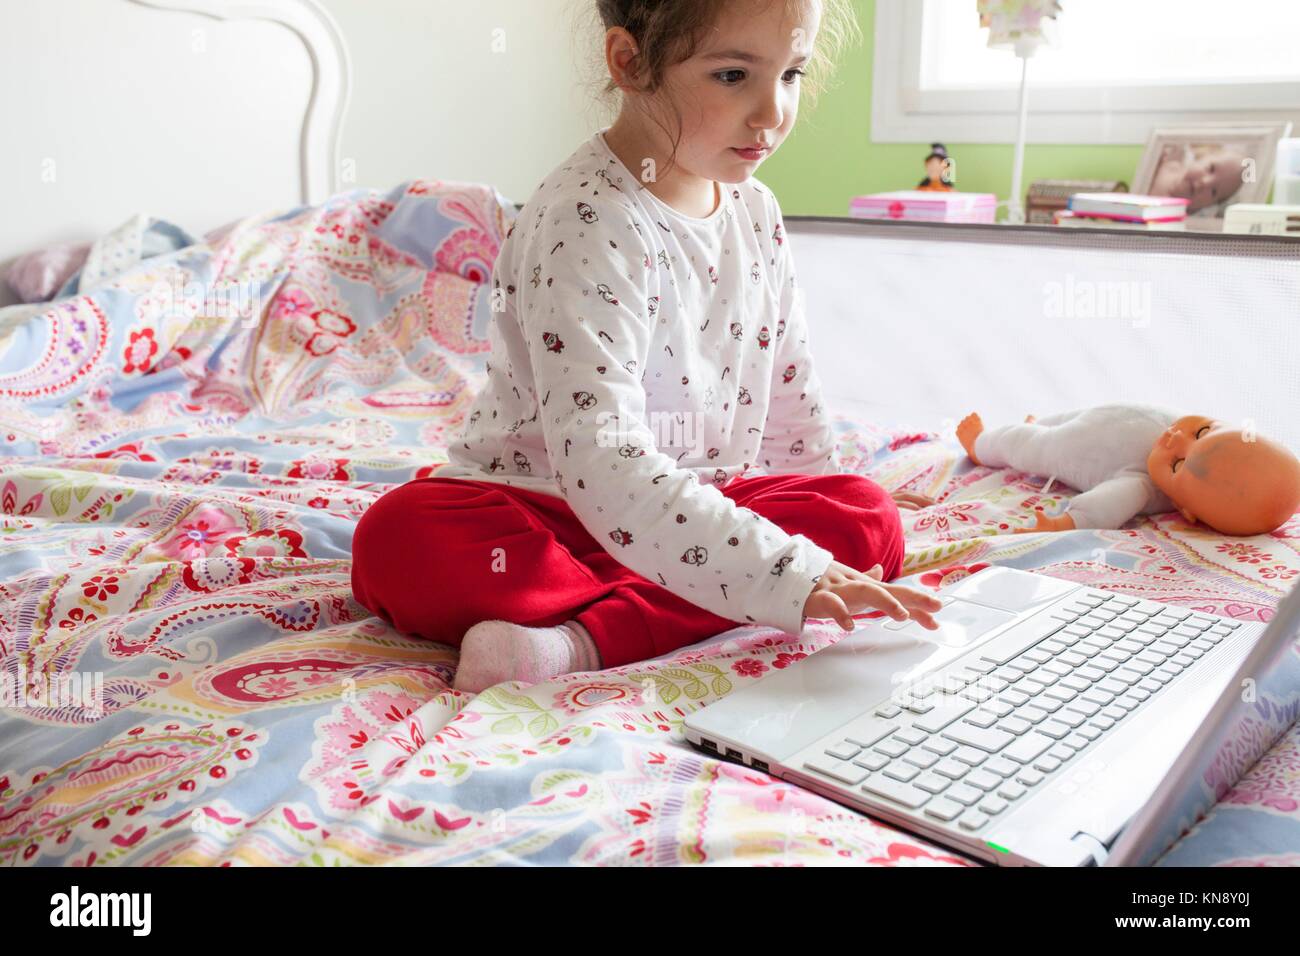 Little girl sitting in bed and surfing on Internet in her bedroom. Parental control concept. Stock Photo